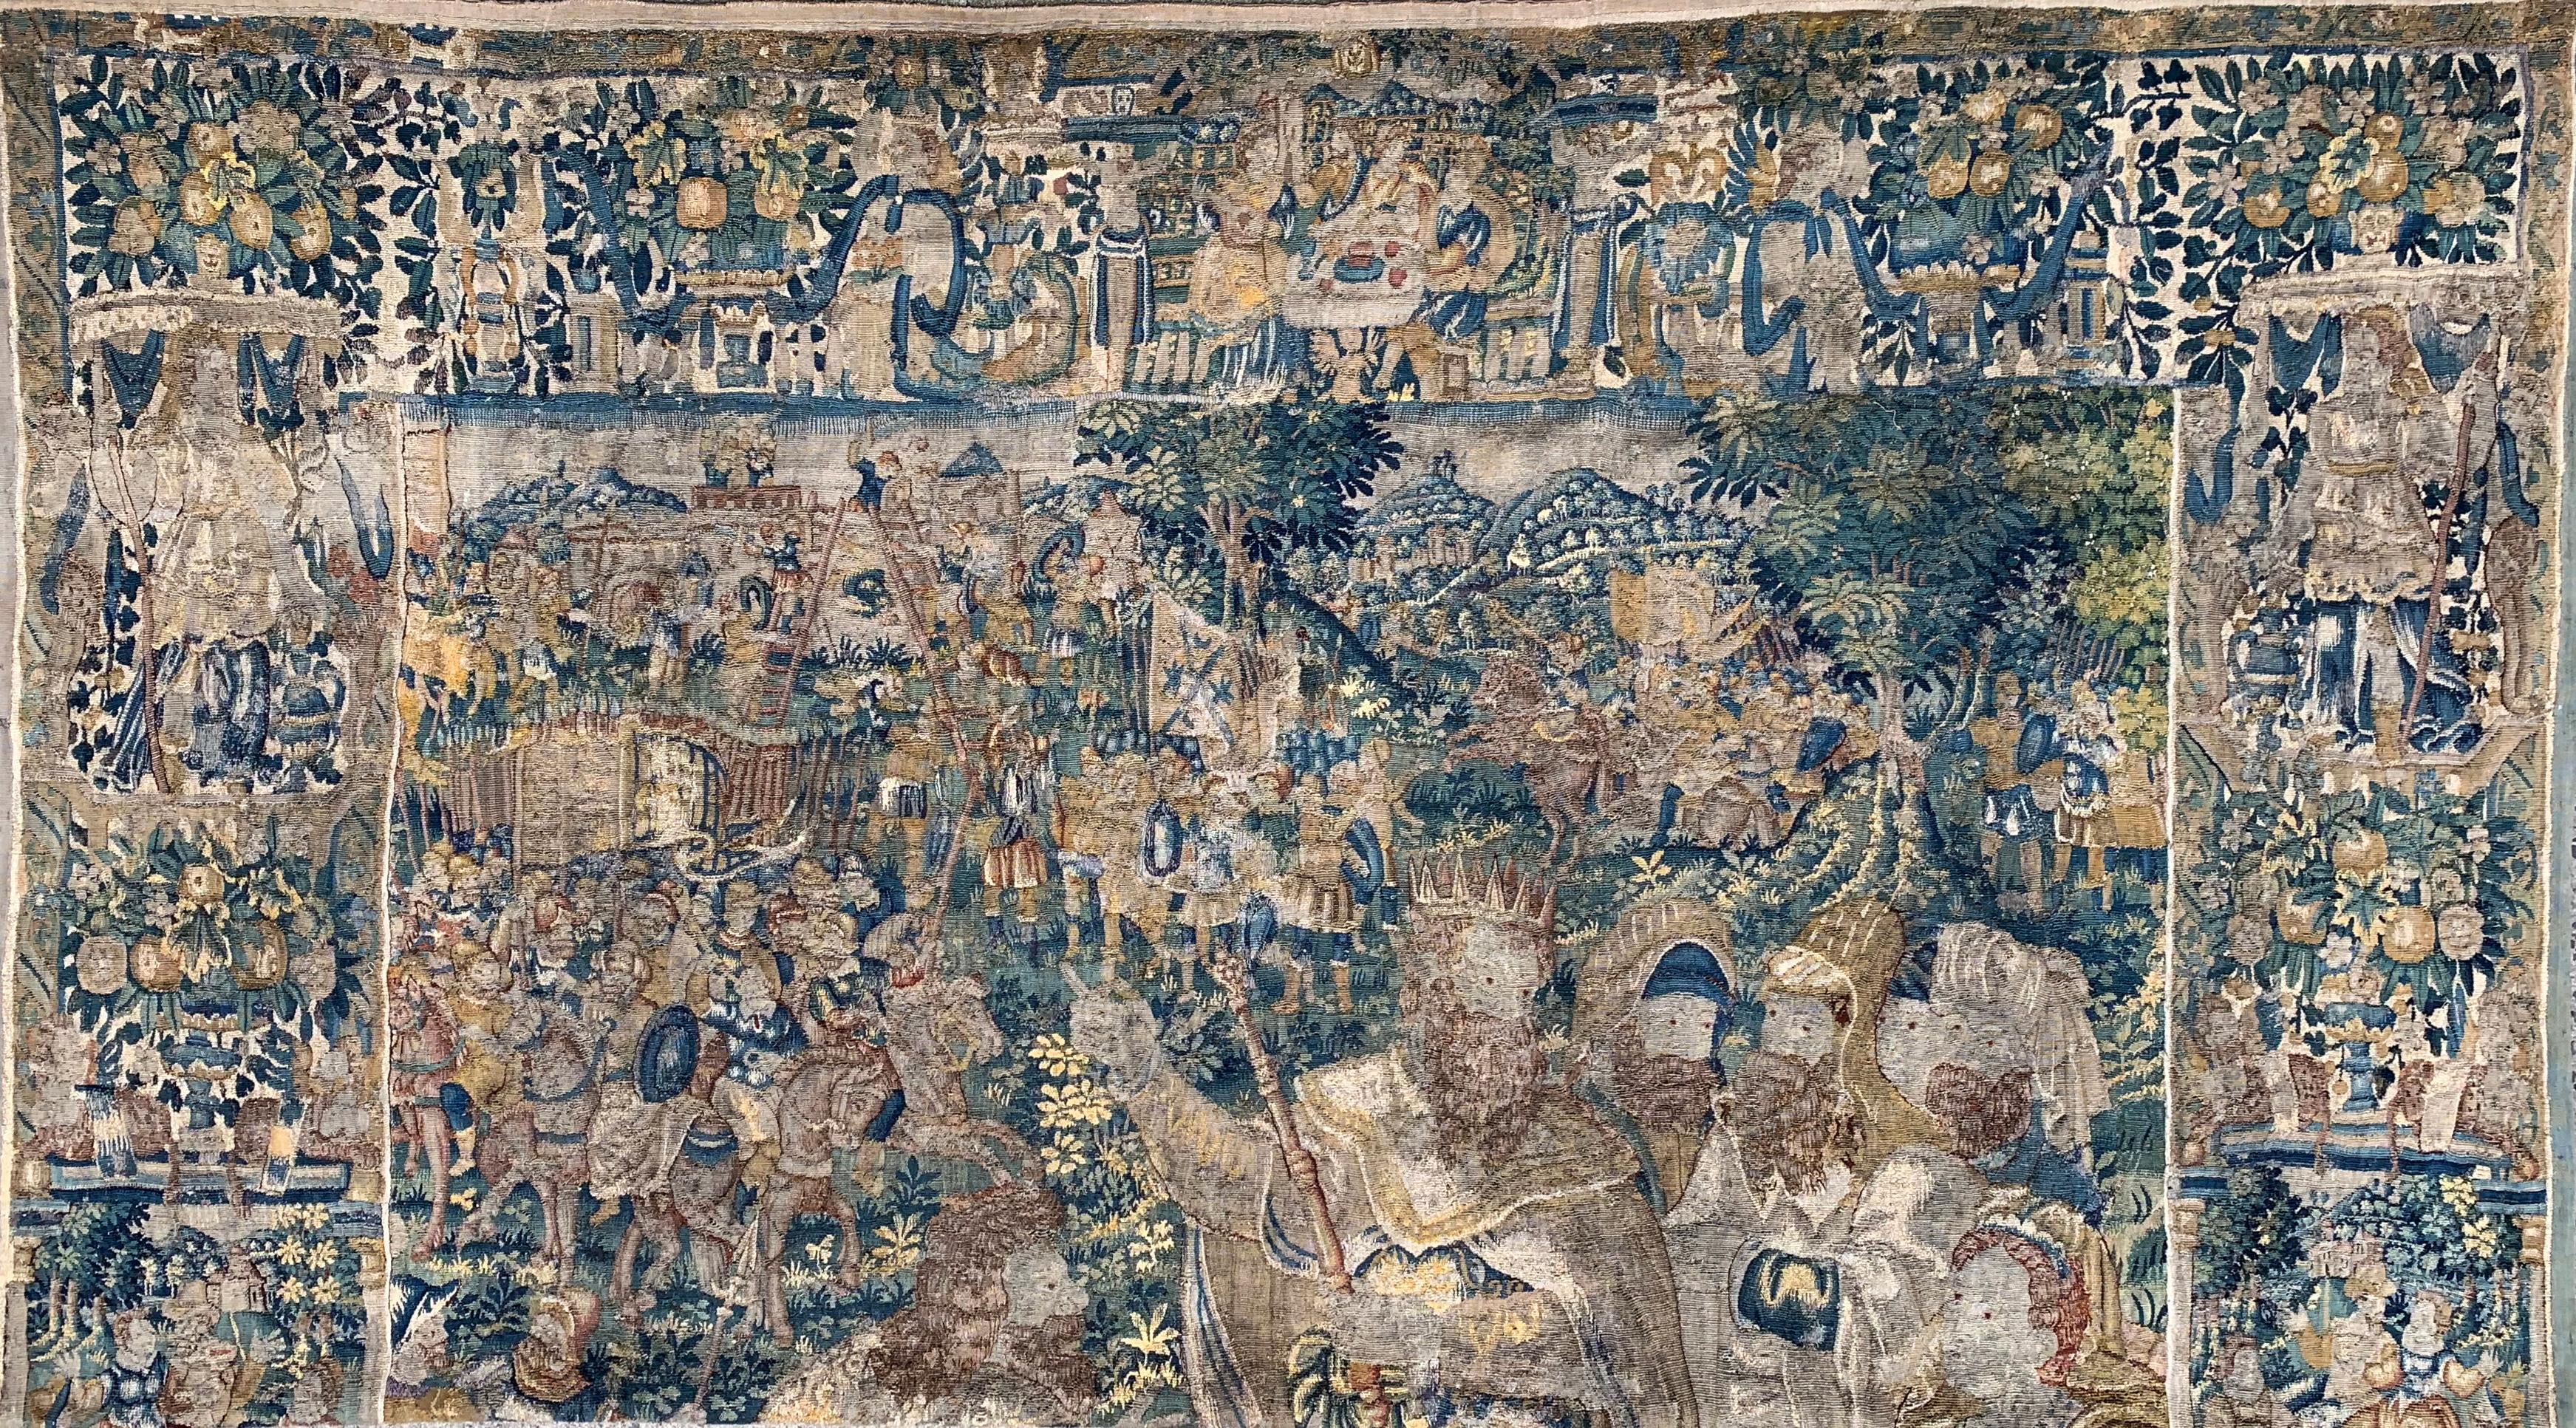 A magnificent Biblical tapestry in wool and silk likely made in the Flemish weaving center of Oudenaarde. With a history of tapestry production dating to 1368, the city created some of the finest tapestries of late Medieval and Renaissance Europe